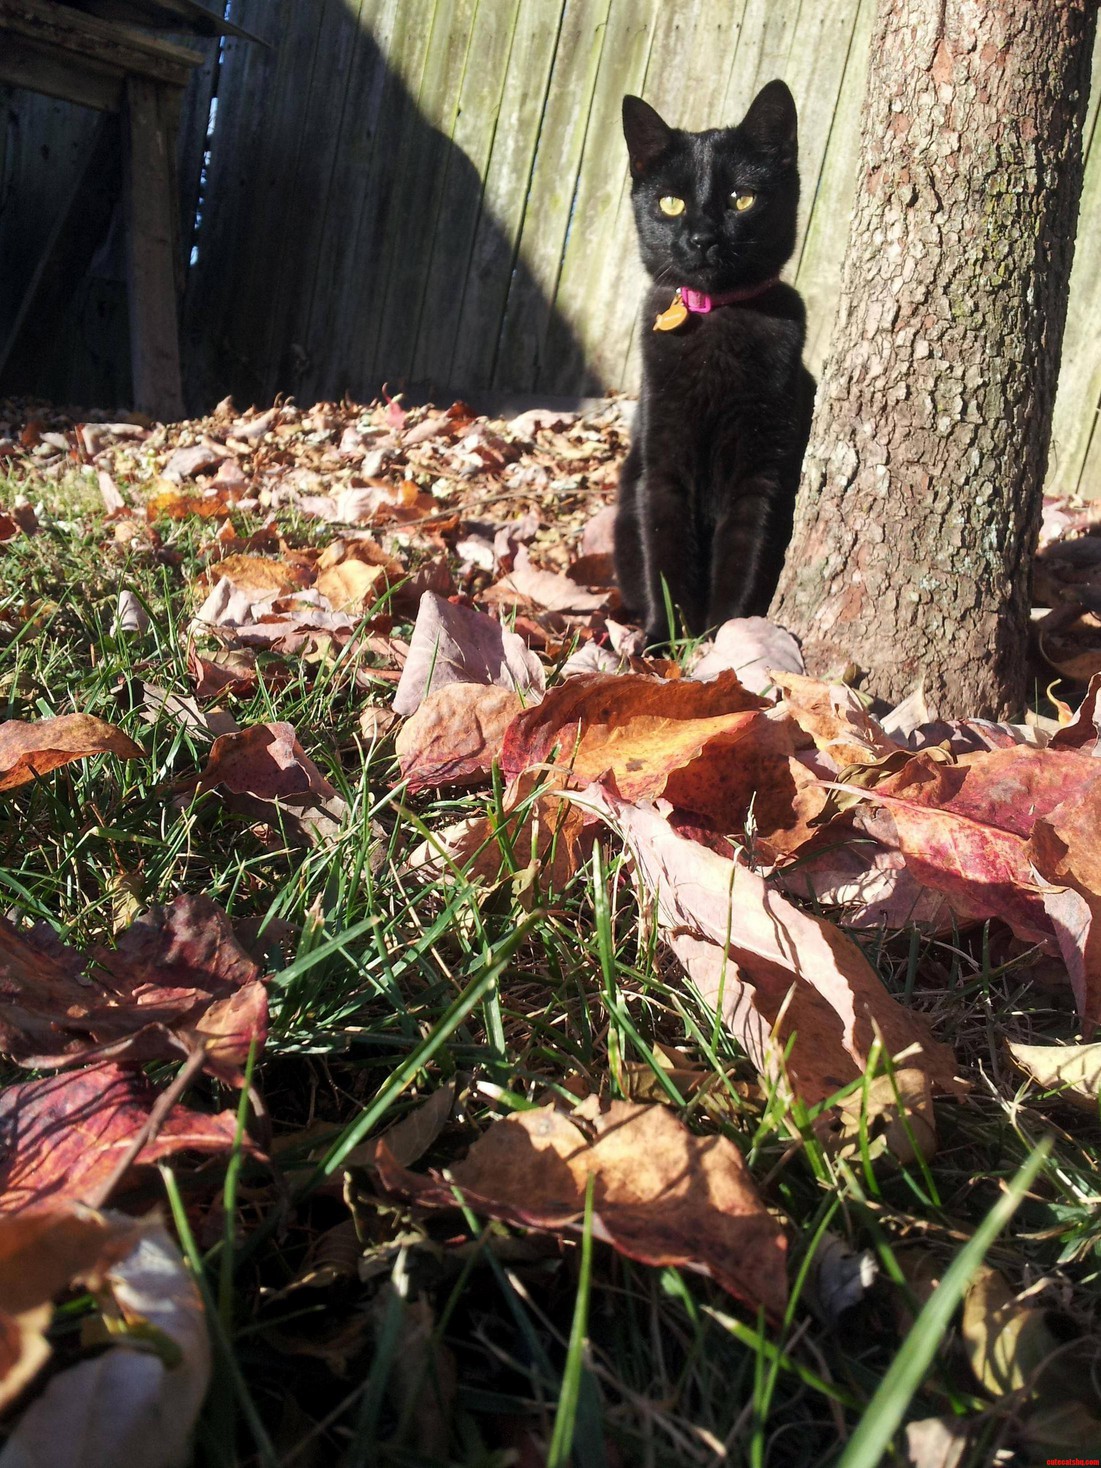 Throwback To Her Modeling Days In The Leaves.